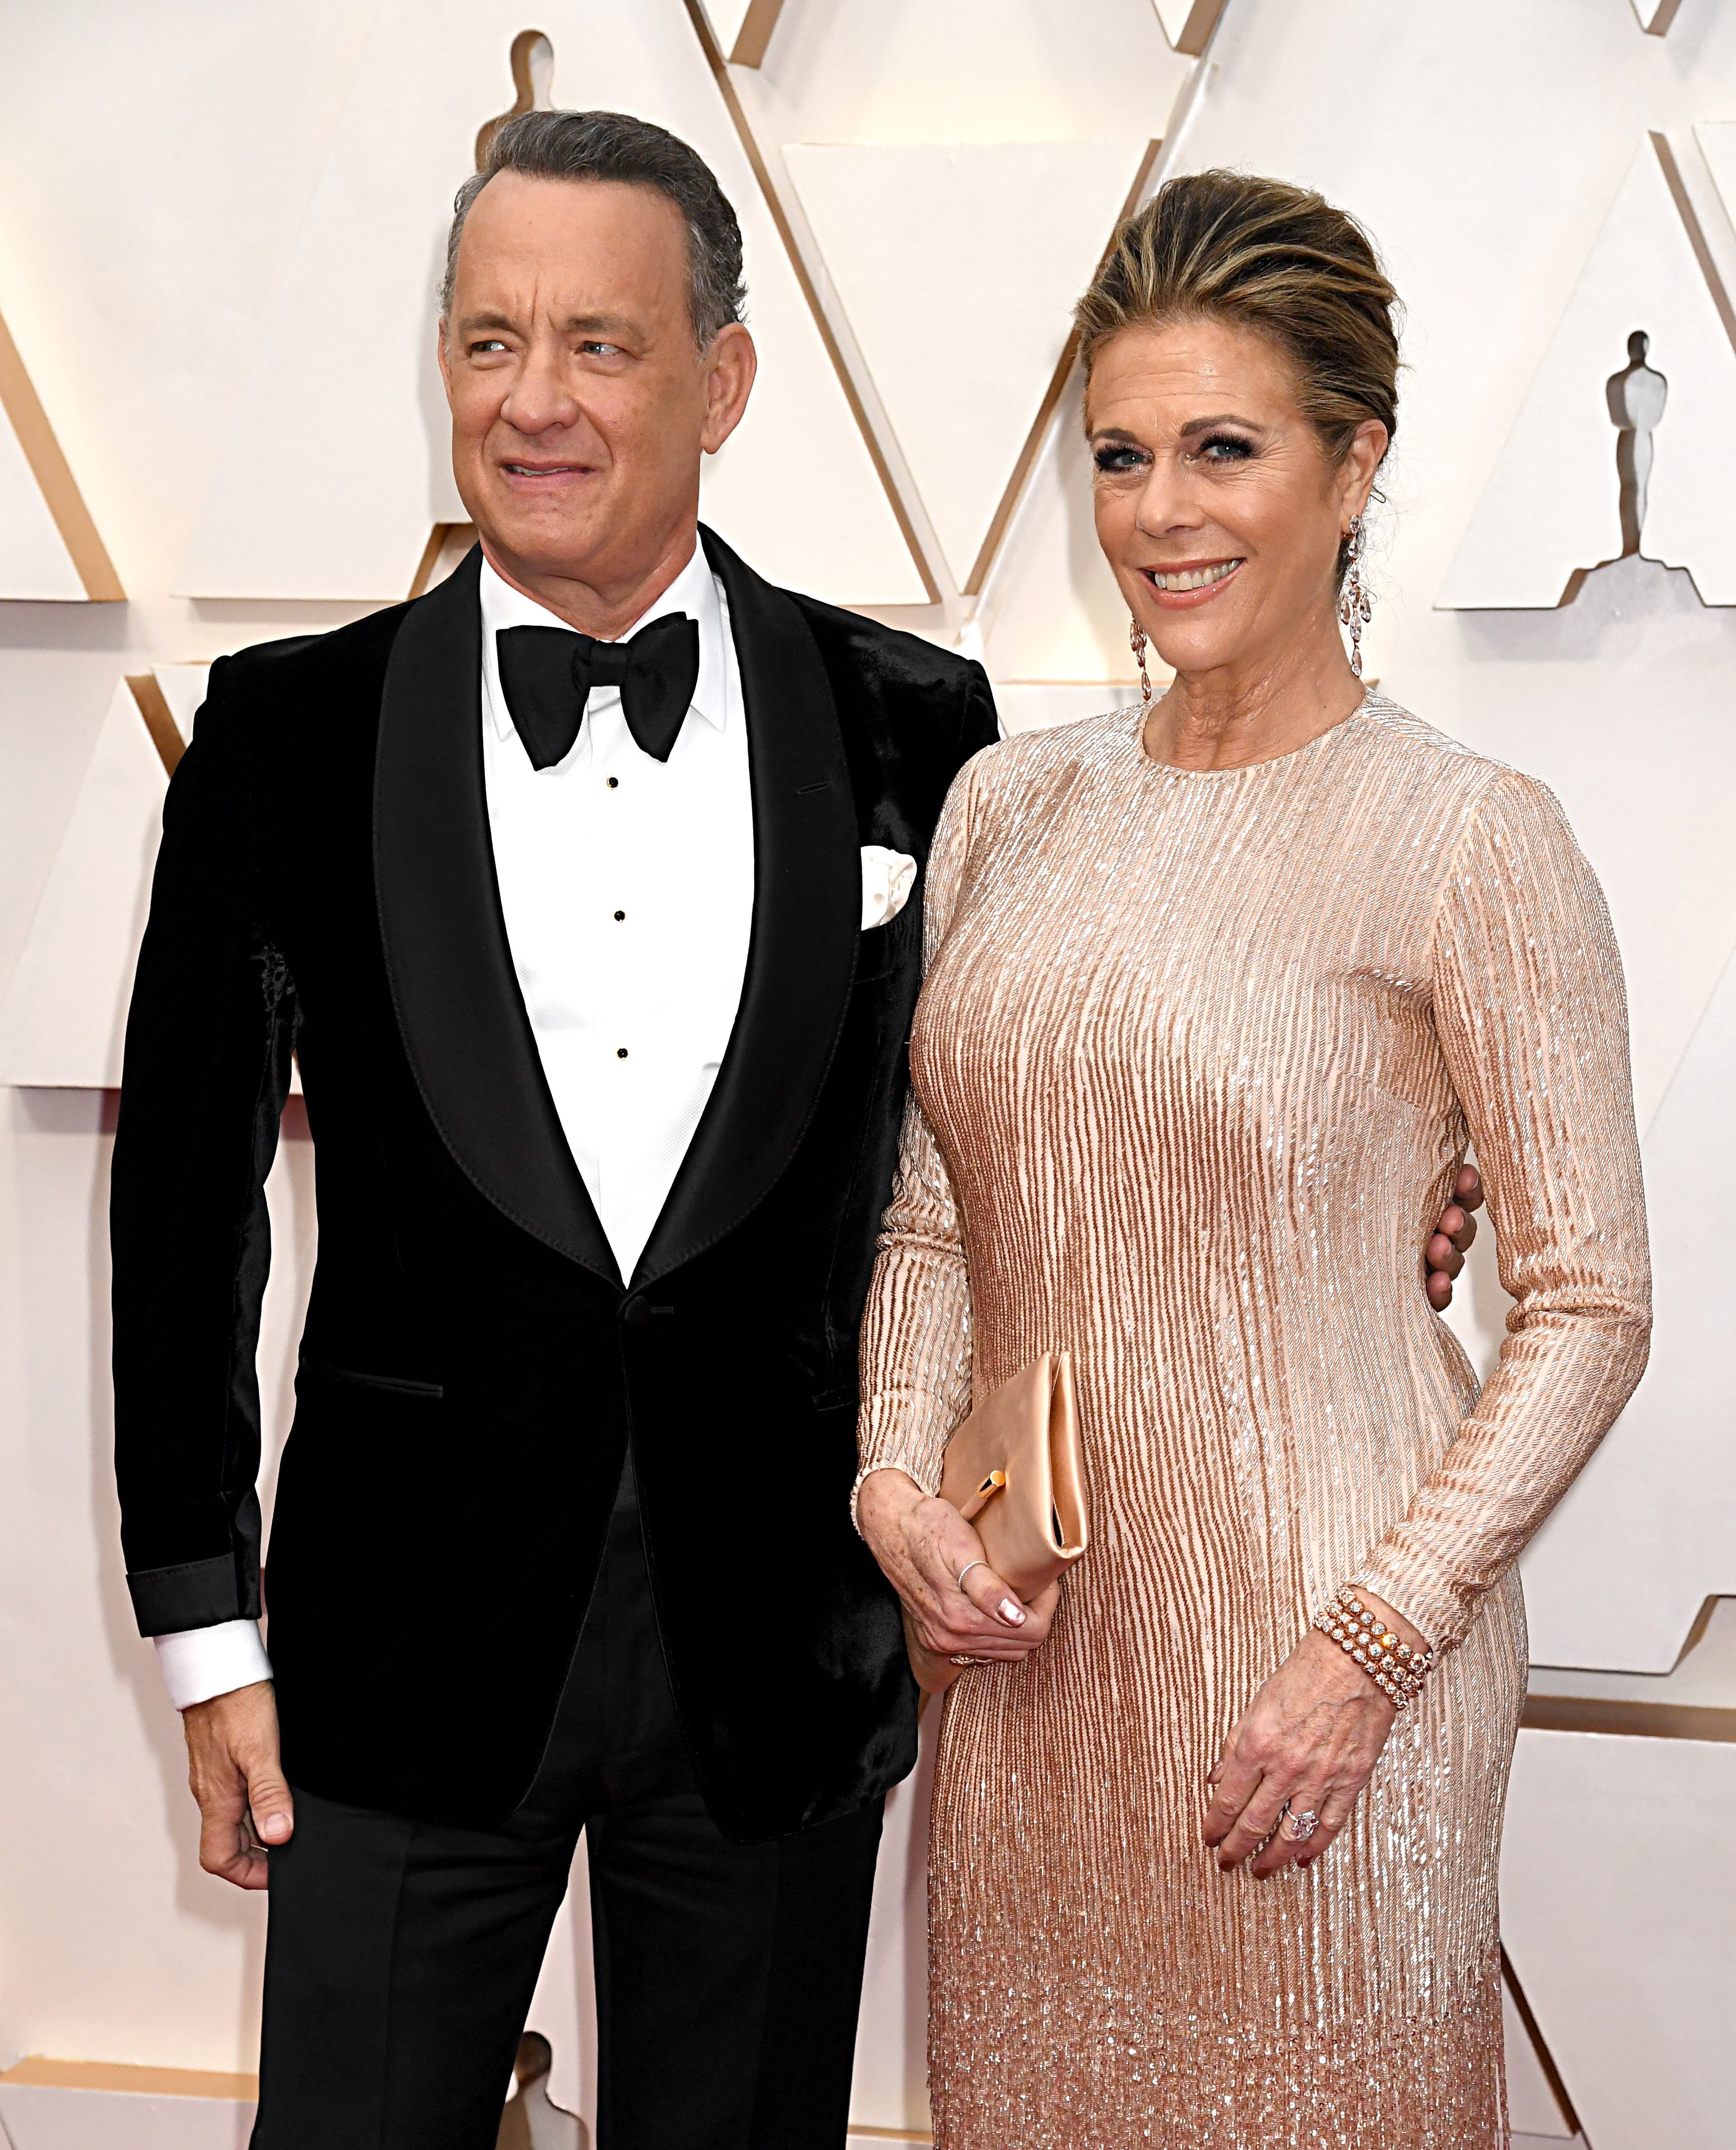 Tom Hanks and Rita Wilson arriving at the 92nd Academy Awards on Sunday February 9 2020 at the Dolby Theatre at Hollywood & Highland Center in Hollywood | Source: Getty Images